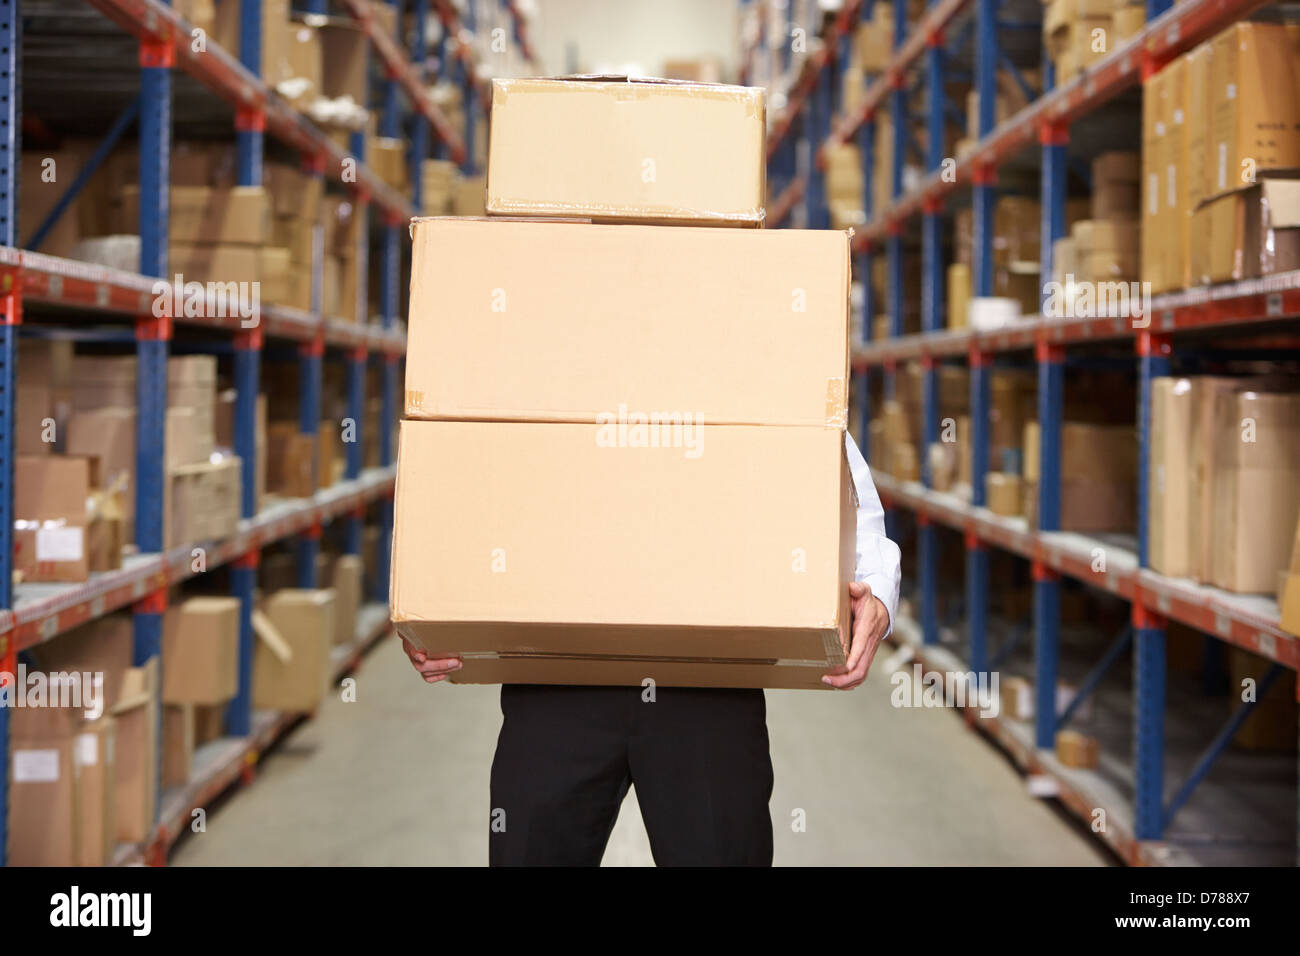 Man Carrying Boxes In Warehouse Stock Photo